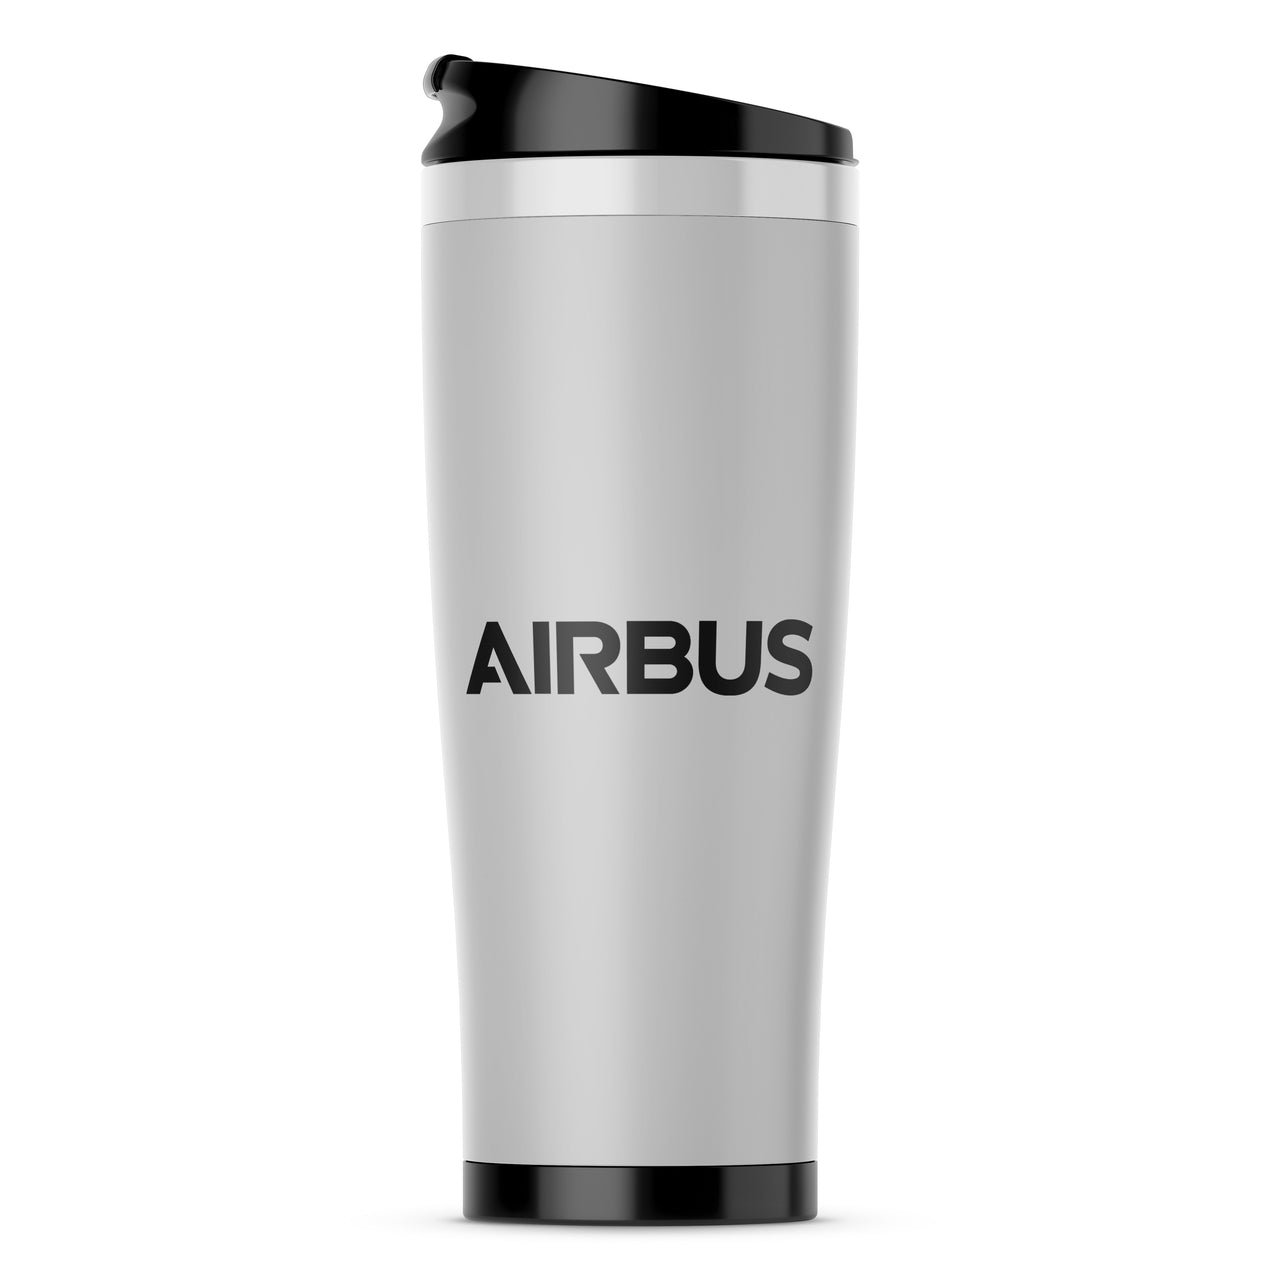 Airbus & Text Designed Stainless Steel Travel Mugs